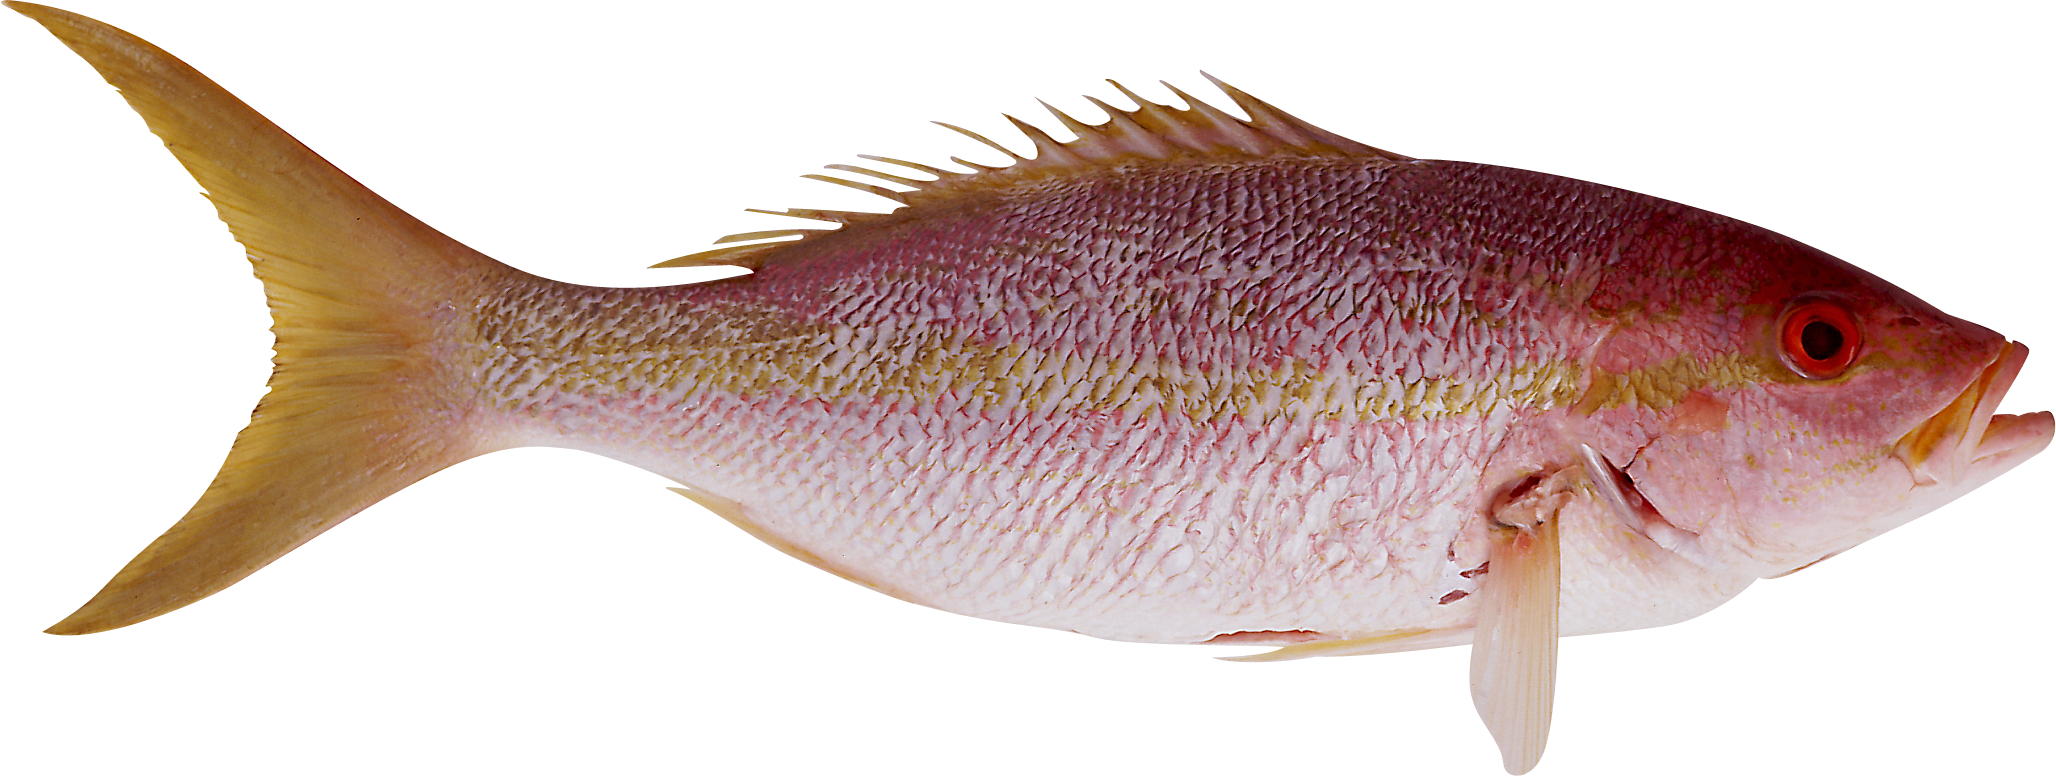 Picture Of Fish PNG - 164748